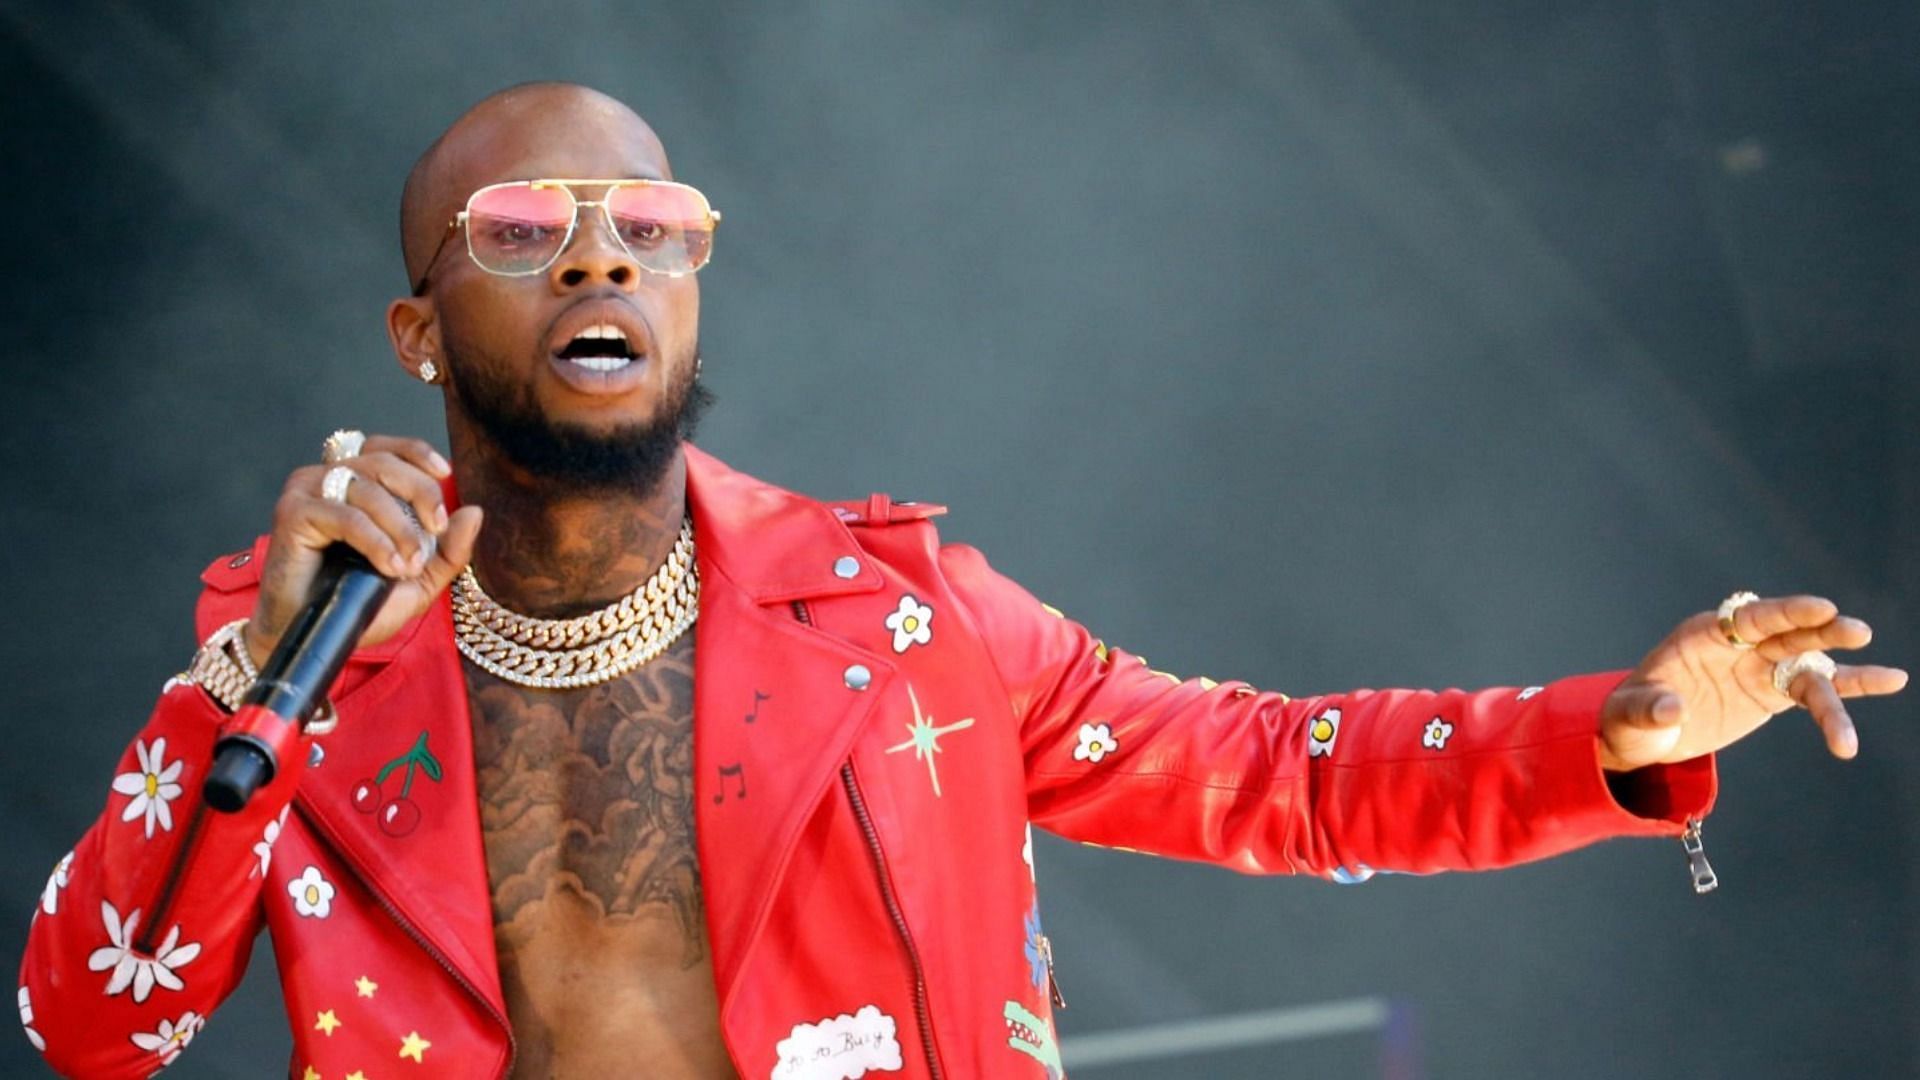 Tory Lanez was levied $350,000 bail for violating pre-trial protective orders in relation to Megan Thee Stallion shooting case (Image via Taylor Hill/WireImage)